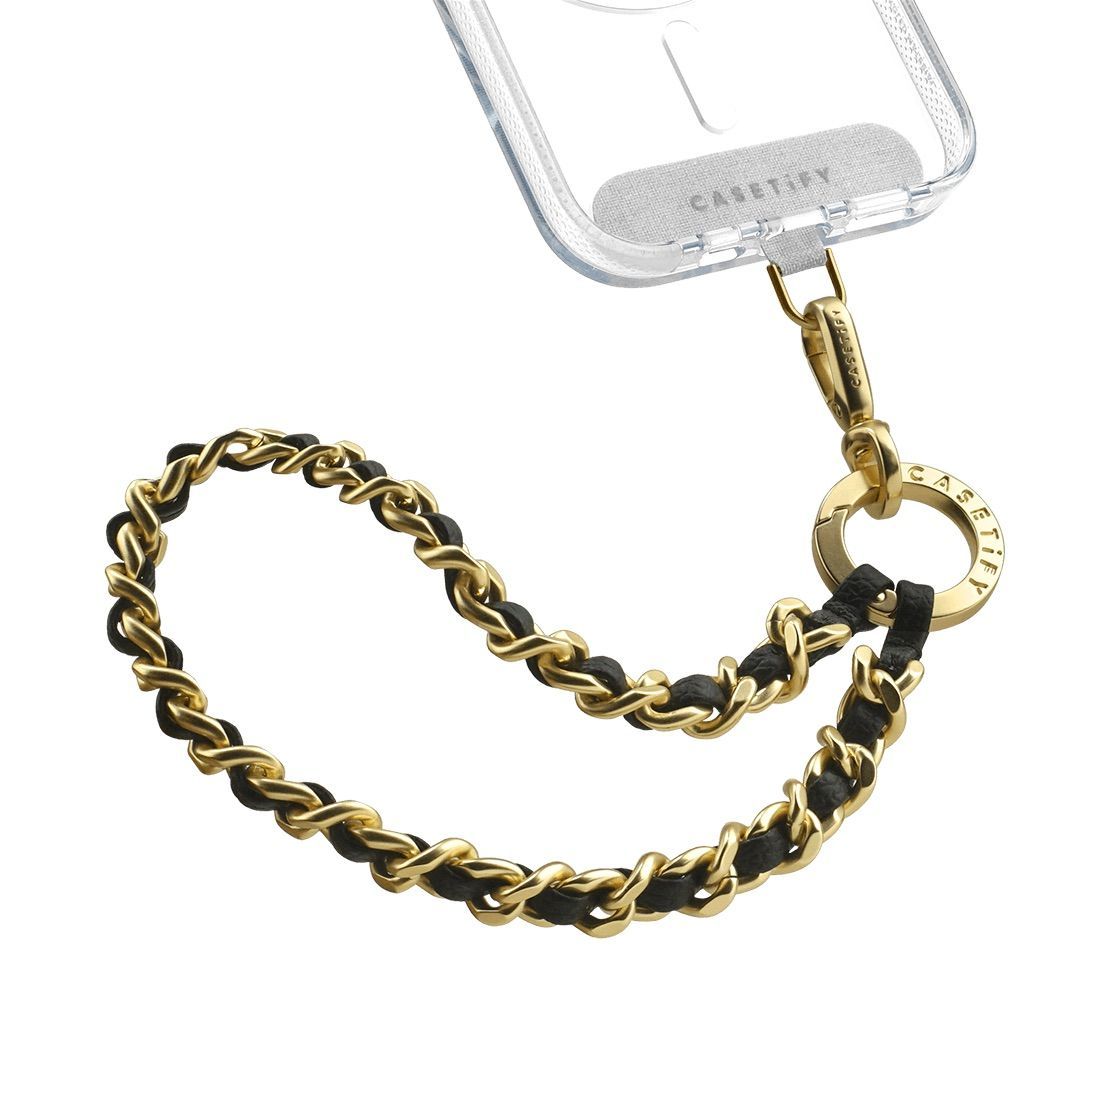 Leather Chain Wrist Strap -  Black in Champagne Gold | Casetify (Global)